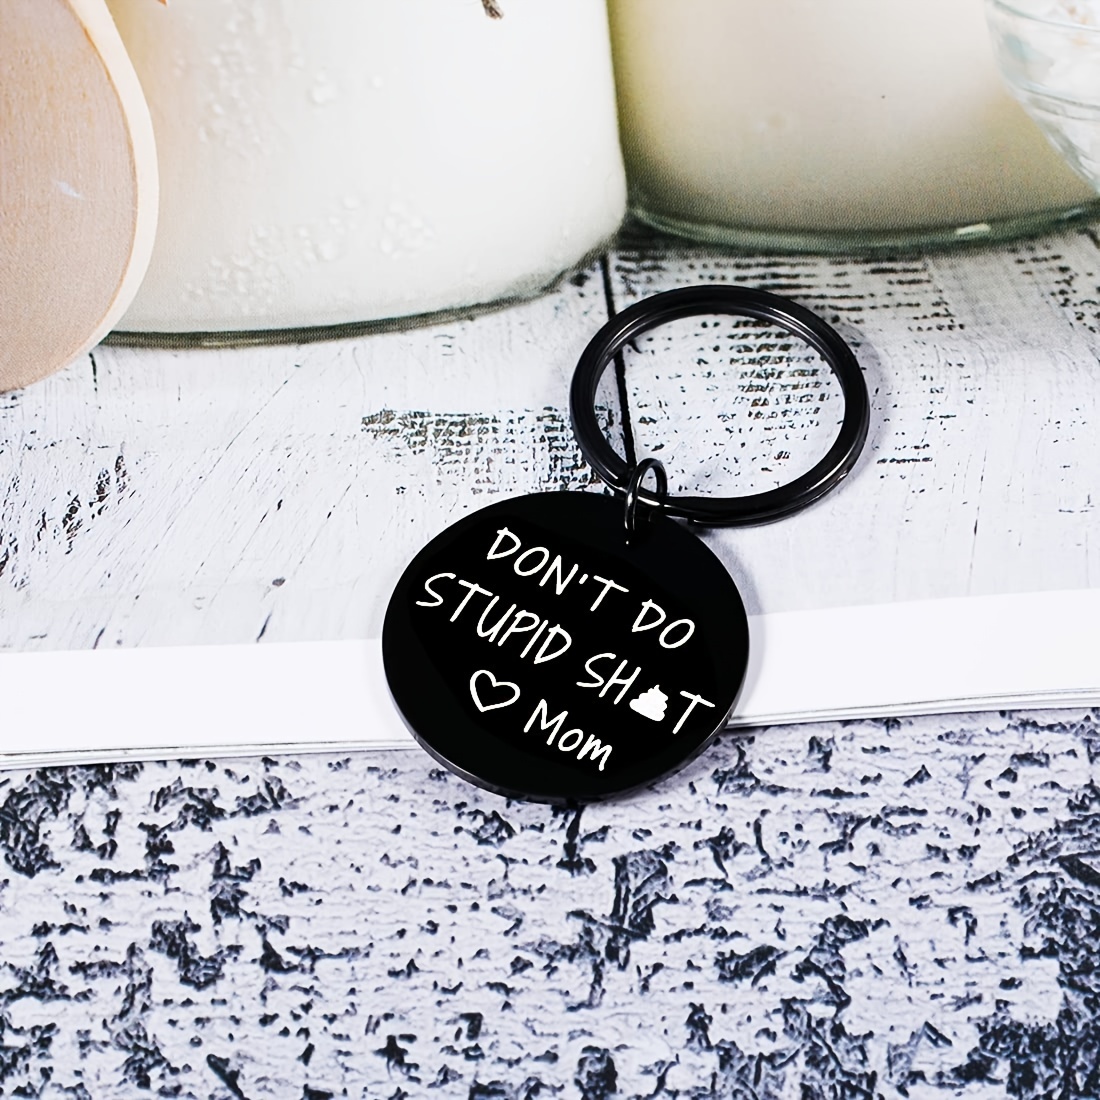 Don't Do Stupid Shit Funny Key Chain for Teenagers Gag Gift Gift